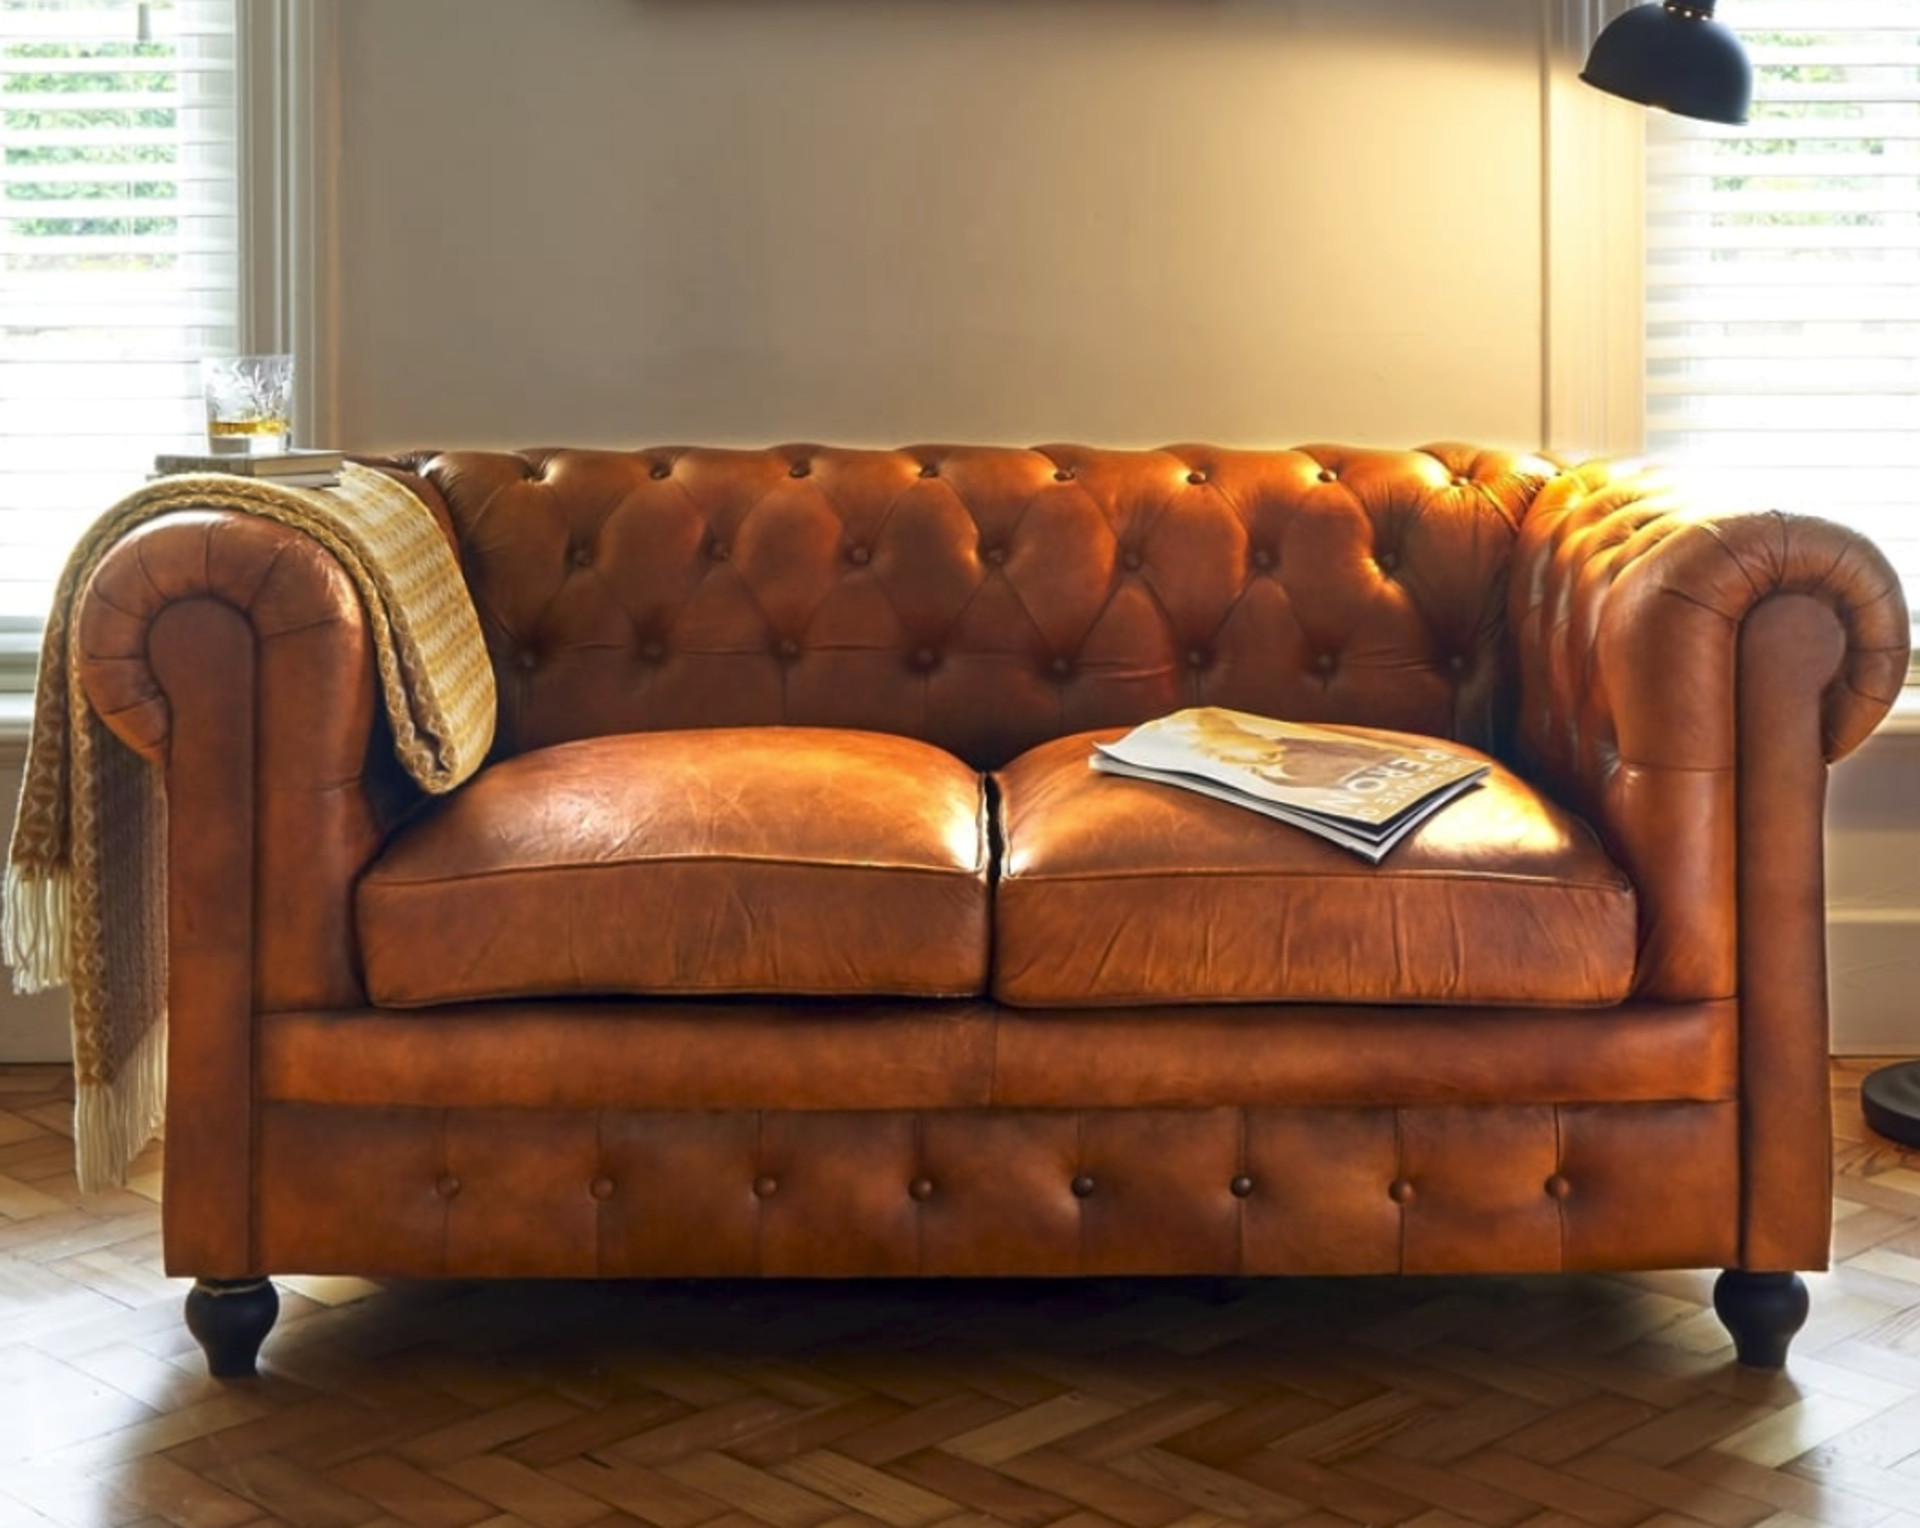 Shoreditch Leather Chesterfield 2-Seater Sofa Antique Tan